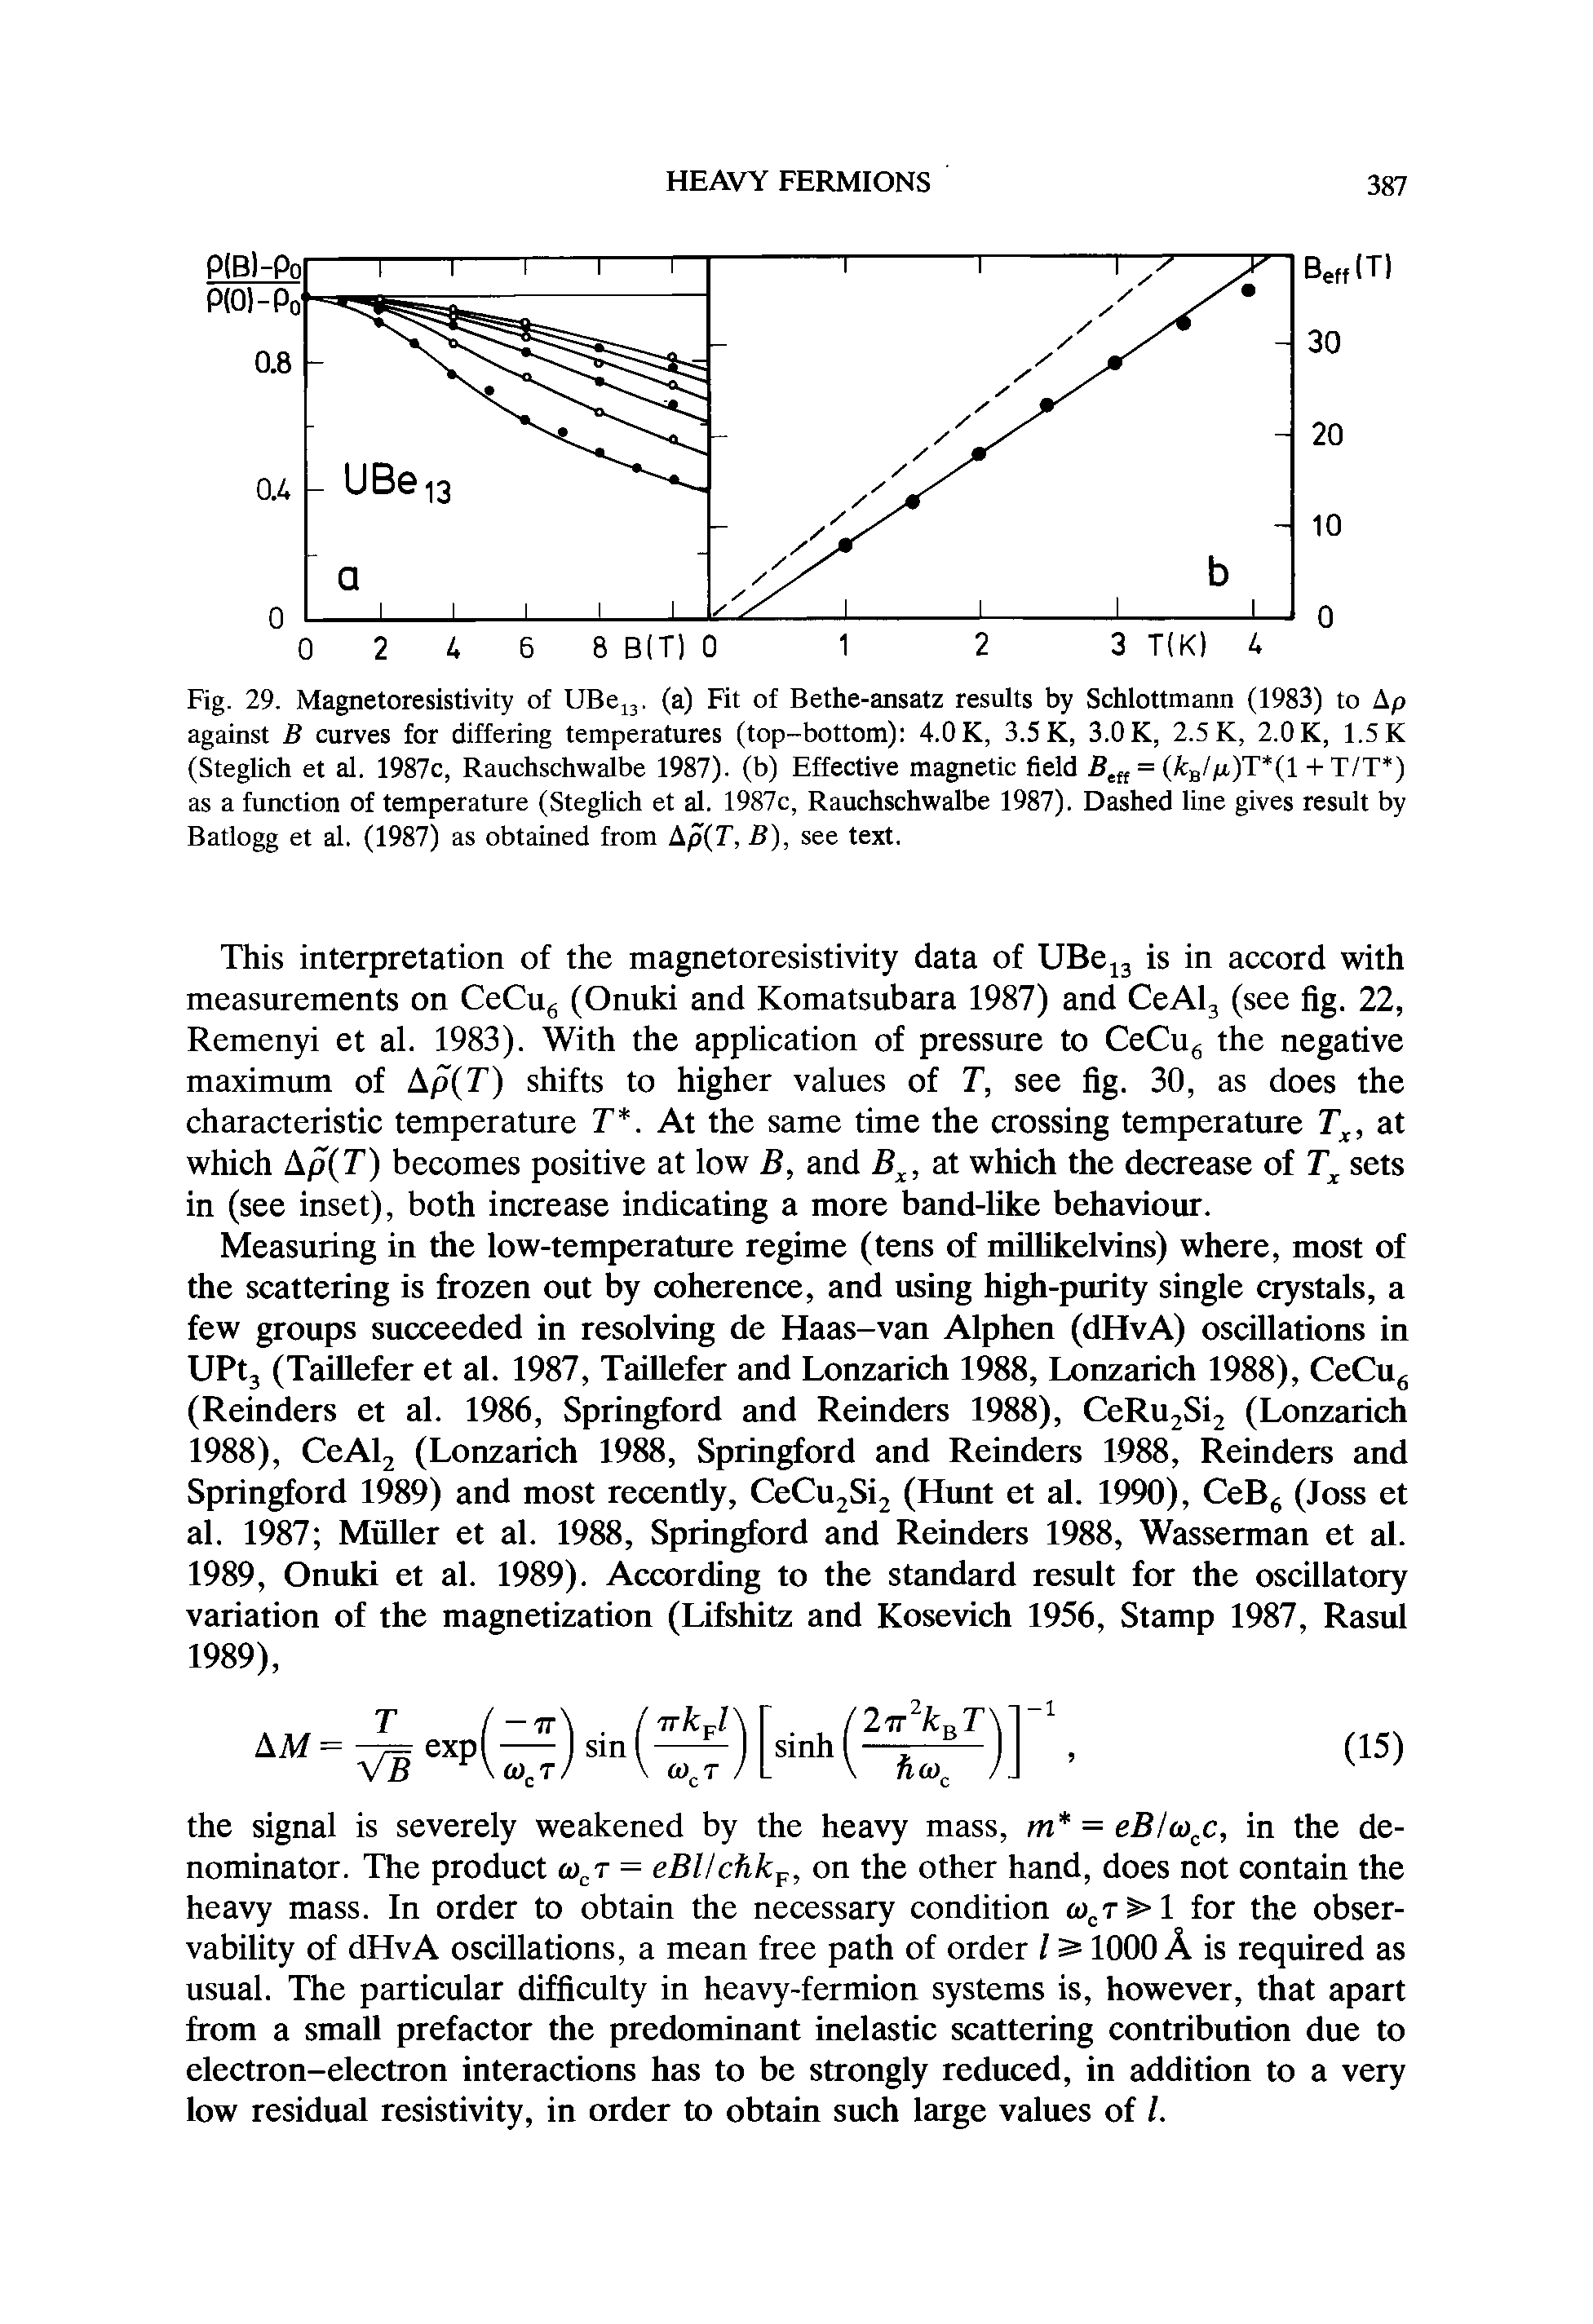 Fig. 29. Magnetoresistivity of UBeij. (a) Fit of Bethe-ansatz results by Schlottmann (1983) to Ap against B curves for differing temperatures (top-bottom) 4.0 K, 3.5 K, 3.0 K, 2.5 K, 2.0 K, 1.5 K (Steglich et al. 1987c, Rauchschwalbe 1987). (b) Effective magnetic field = (A b/p,)T (1 + T/T ) as a function of temperature (Steglich et al. 1987c, Rauchschwalbe 1987). Dashed line gives result by Batlogg et al. (1987) as obtained from Ap(T, B), see text.